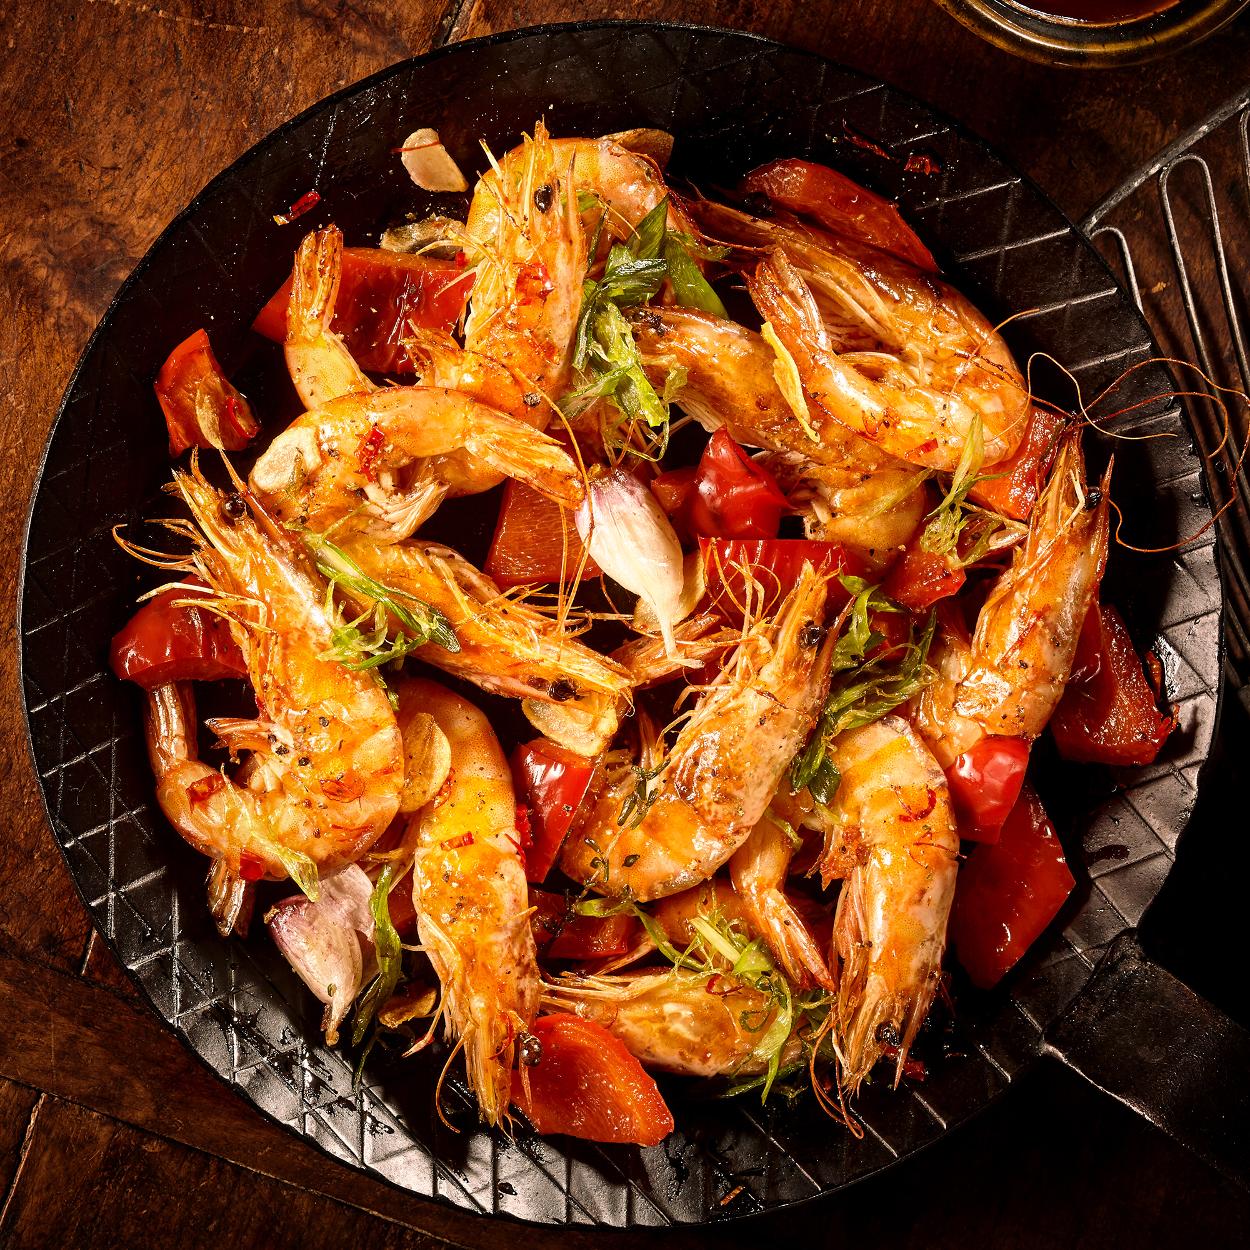 Spicy pan fried shrimp